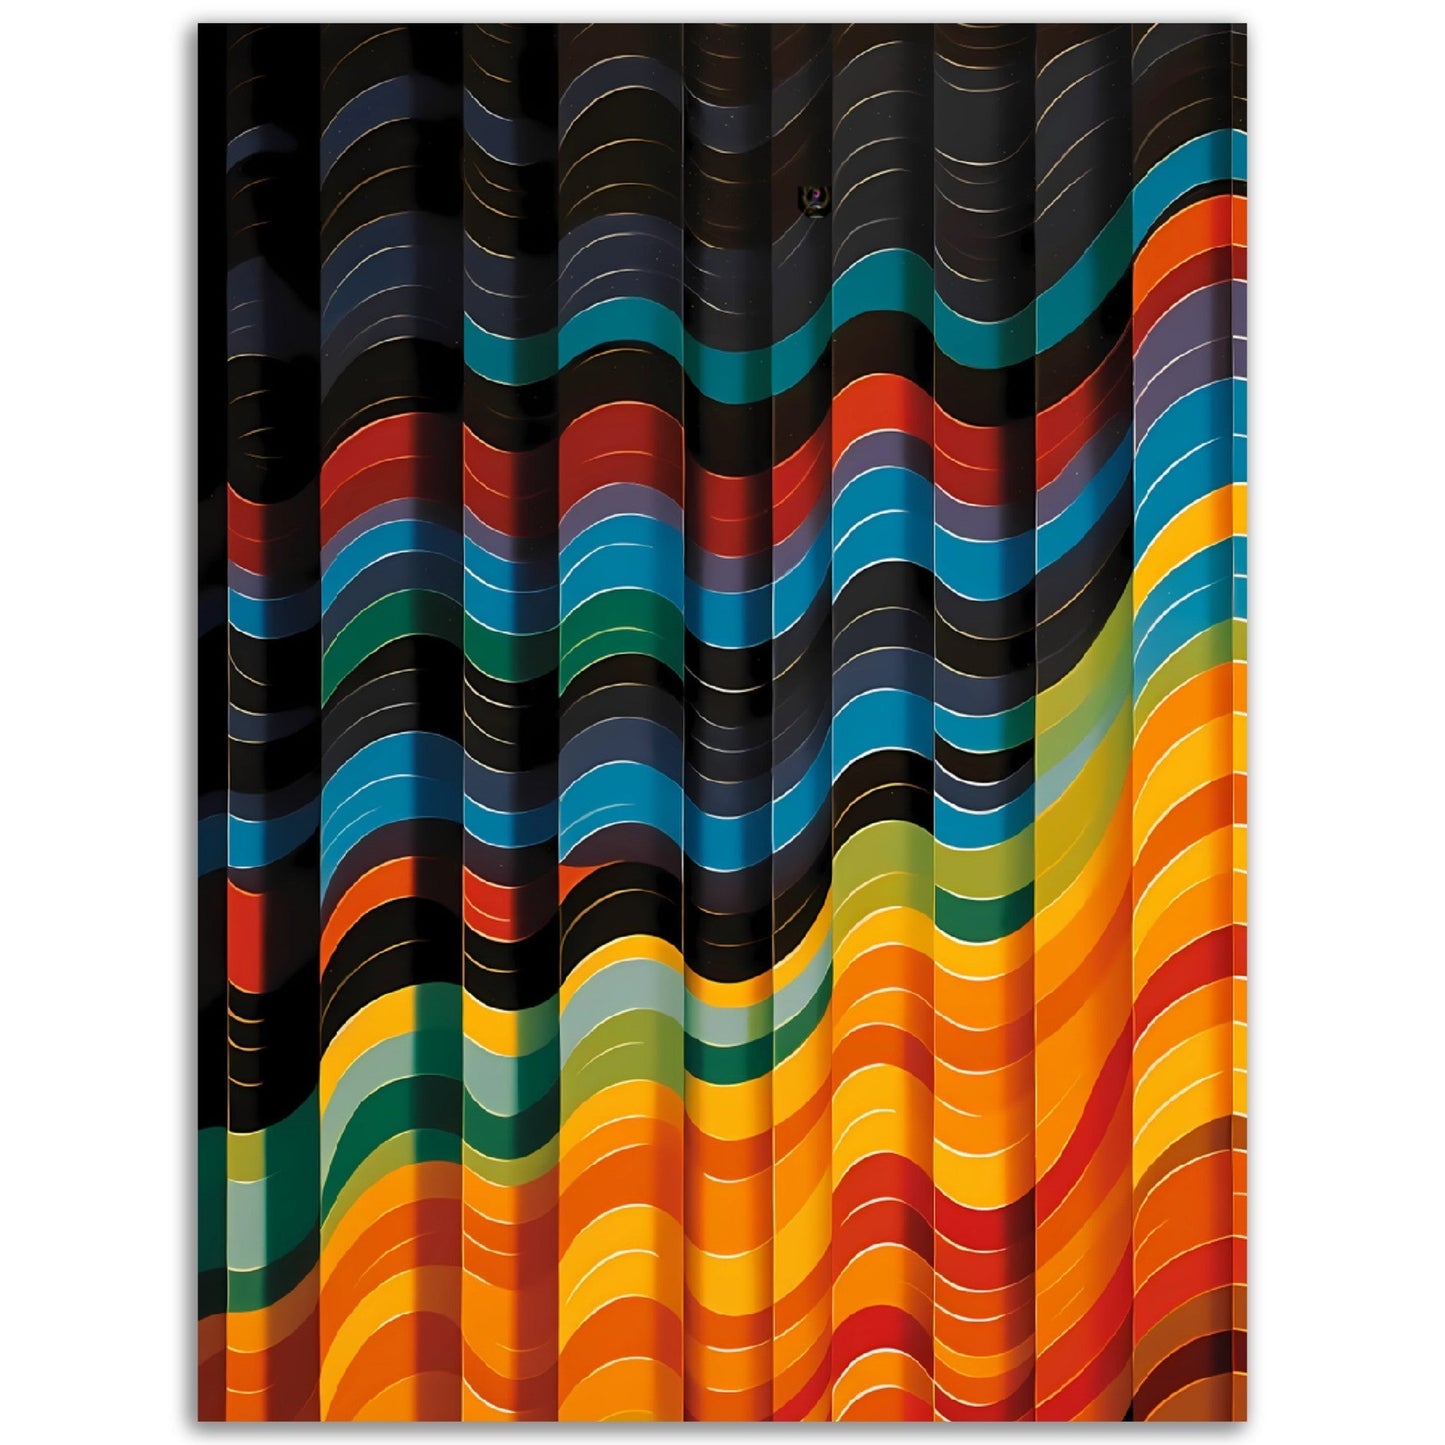 A vibrant poster displaying an abstract painting of colorful wavy lines on a black background, perfect for adding intrigue to any wall. Introducing the Colourful Curtains, perfect for adding intrigue to any wall.